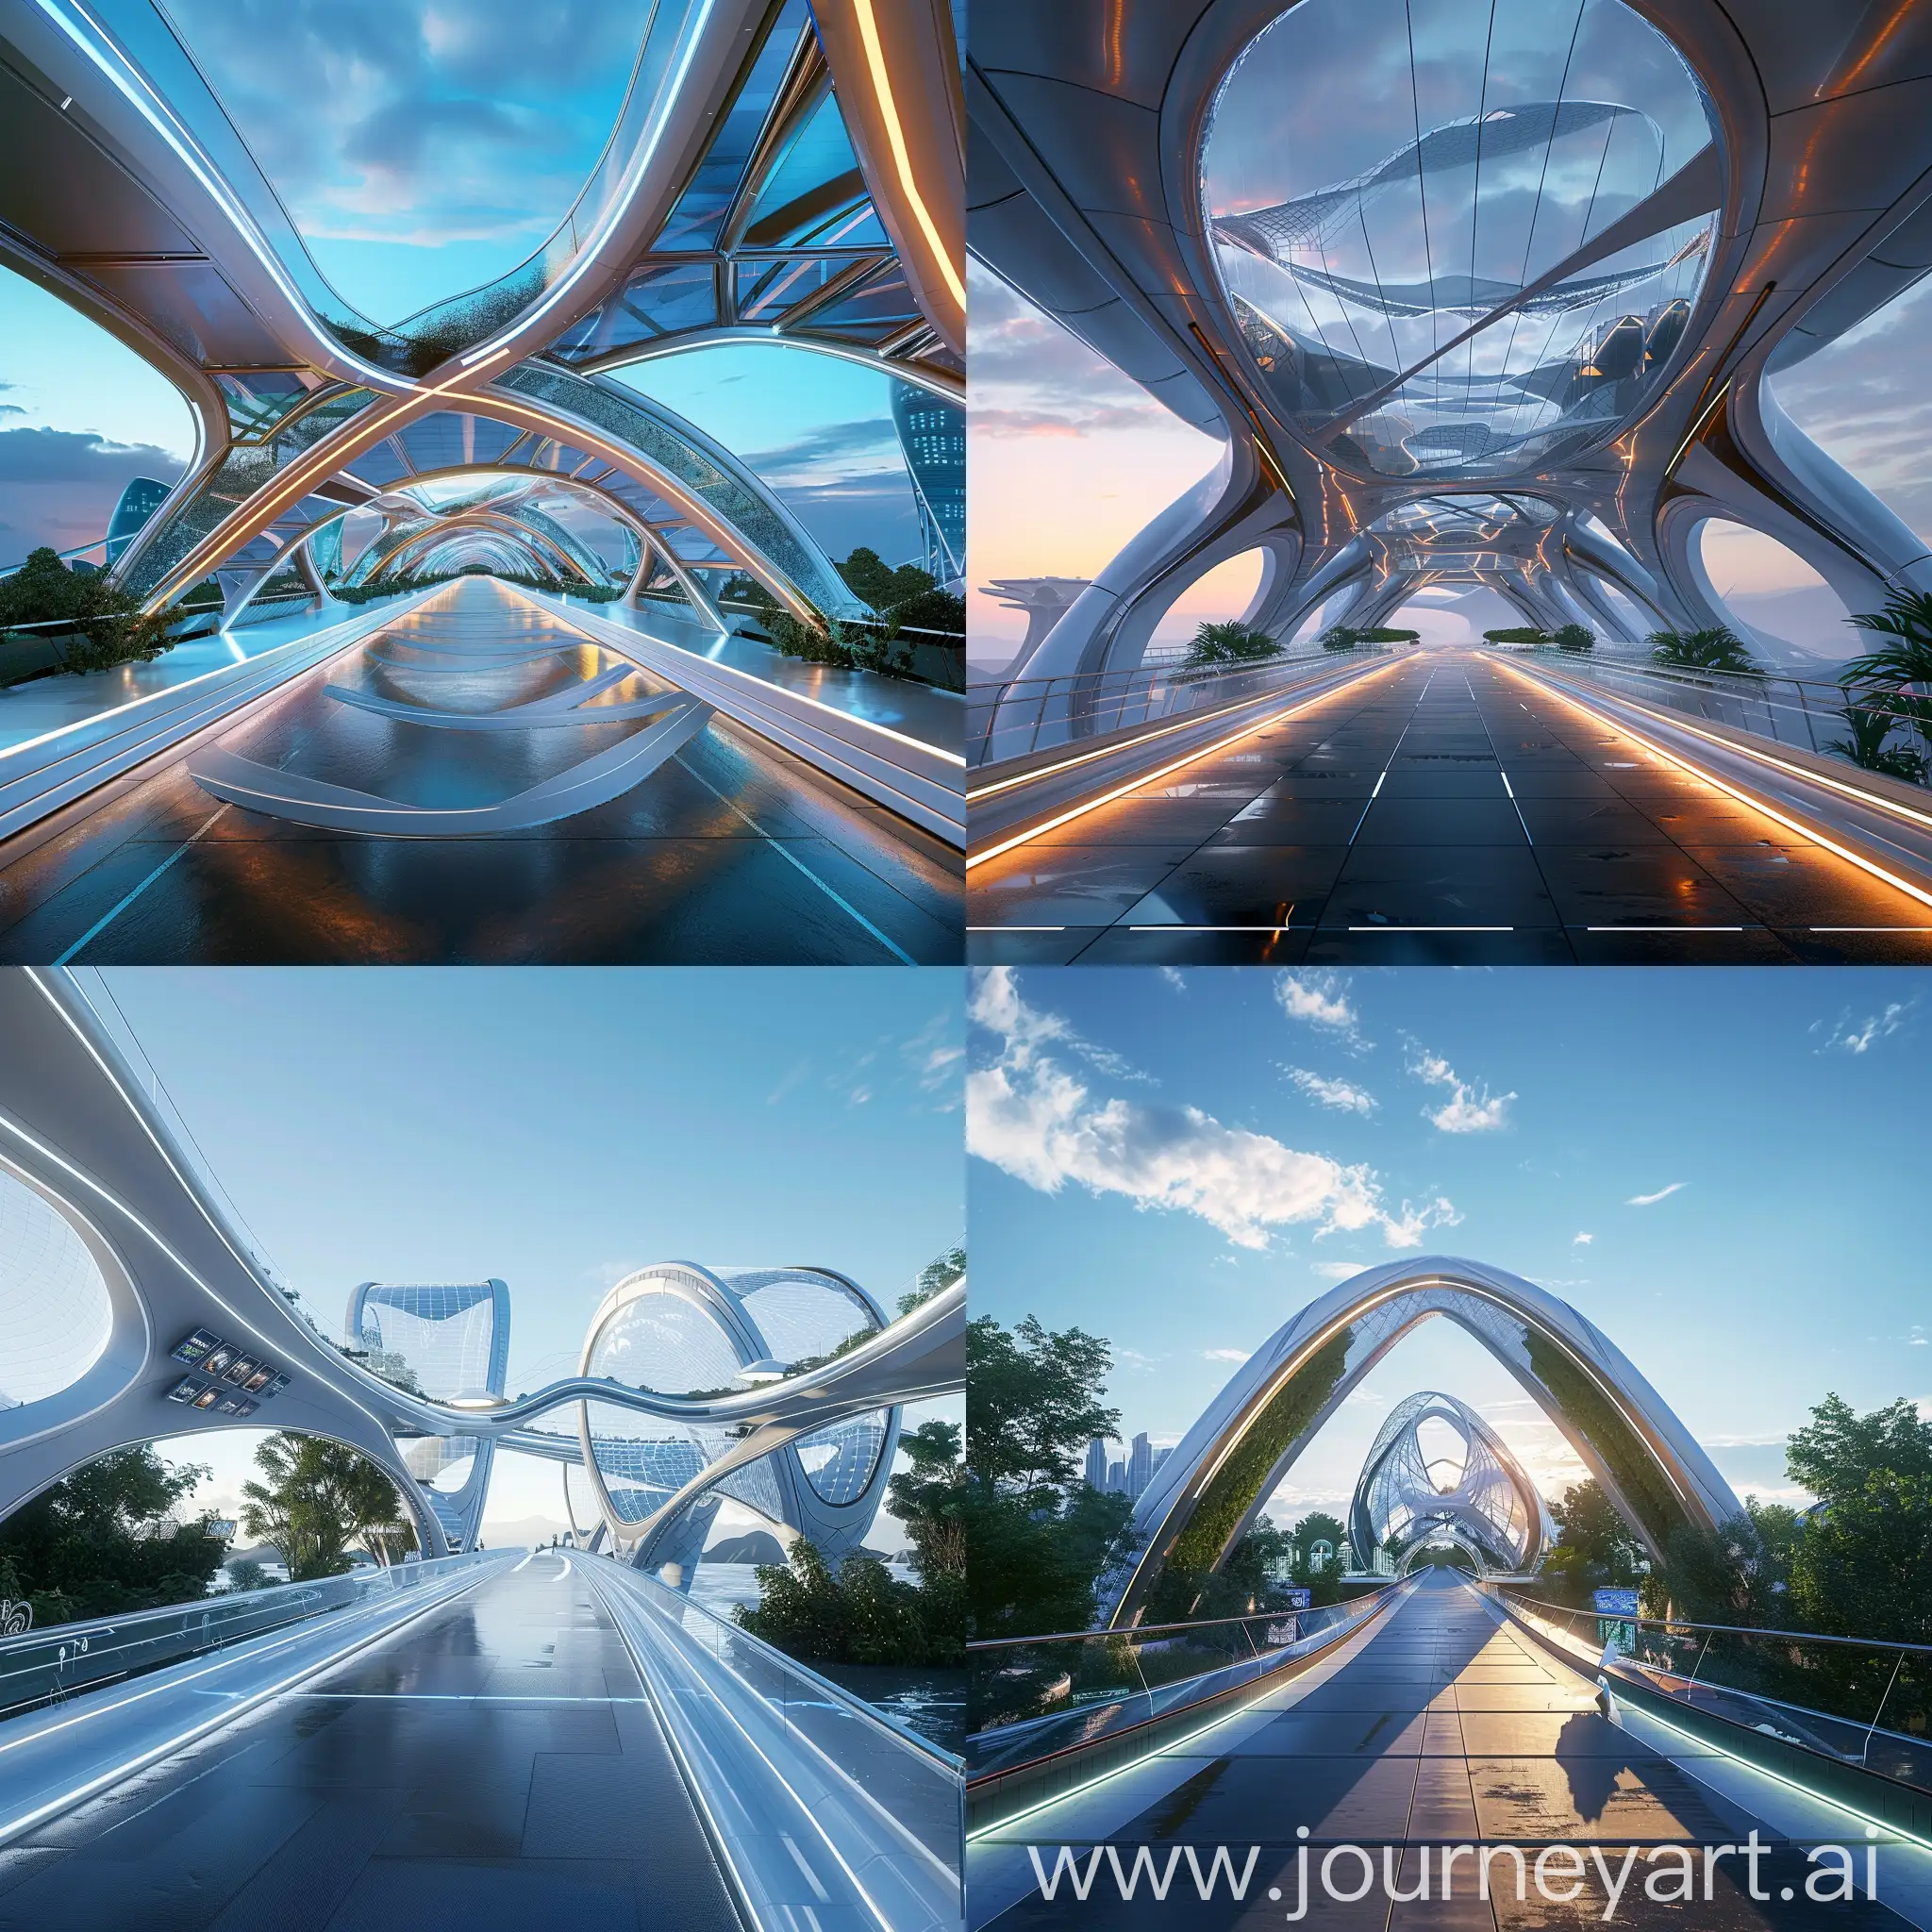 Futuristic bridge, in futuristic style, Smart Sensors, Self-healing Materials, Energy Harvesting Systems, Adaptive Lighting, Augmented Reality Navigation, Dynamic Morphing Structures, Air Quality Management Systems, Holographic Signage and Displays, Biometric Security Systems, Modular Design for Upgradability, Solar Panels, Dynamic LED Lighting, Greenery Facades, Transparent Noise Barriers, Kinetic Energy Harvesters, Augmented Reality Art Installations, Hydrodynamic Turbines, Reflective Coatings, Flexible Photovoltaic Membranes, Interactive Information Displays, Virtual Reality Walkways, Holographic Information Stations, Augmented Reality Safety Guides, Immersive Audio Experience, Interactive Gesture Controls, Dynamic Environmental Simulation, Biometric Feedback Stations, Immersive Art Installations, Virtual Collaboration Spaces, Dynamic Spatial Navigation, Augmented Reality Façade, Interactive Light Shows, Holographic Scenic Views, Kinetic Sculptures, Virtual Reality Observation Decks, Interactive Environmental Sensors, Dynamic Projection Mapping, Augmented Reality Wayfinding, Interactive Public Art Installations, Immersive Environmental Storytelling, unreal engine 5 --stylize 1000